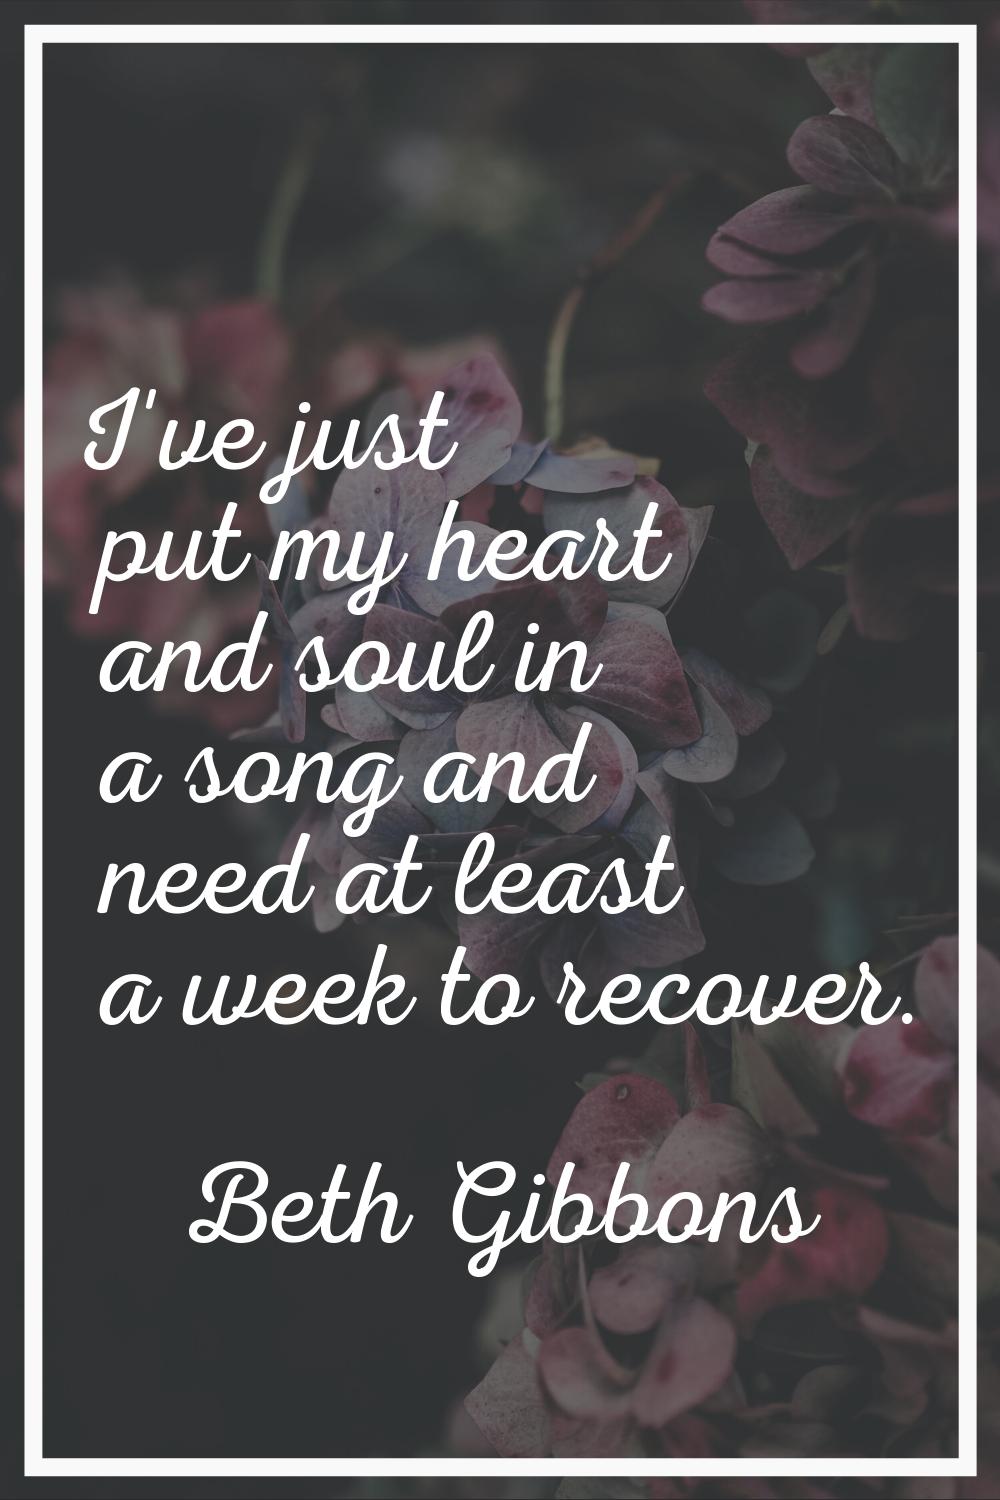 I've just put my heart and soul in a song and need at least a week to recover.